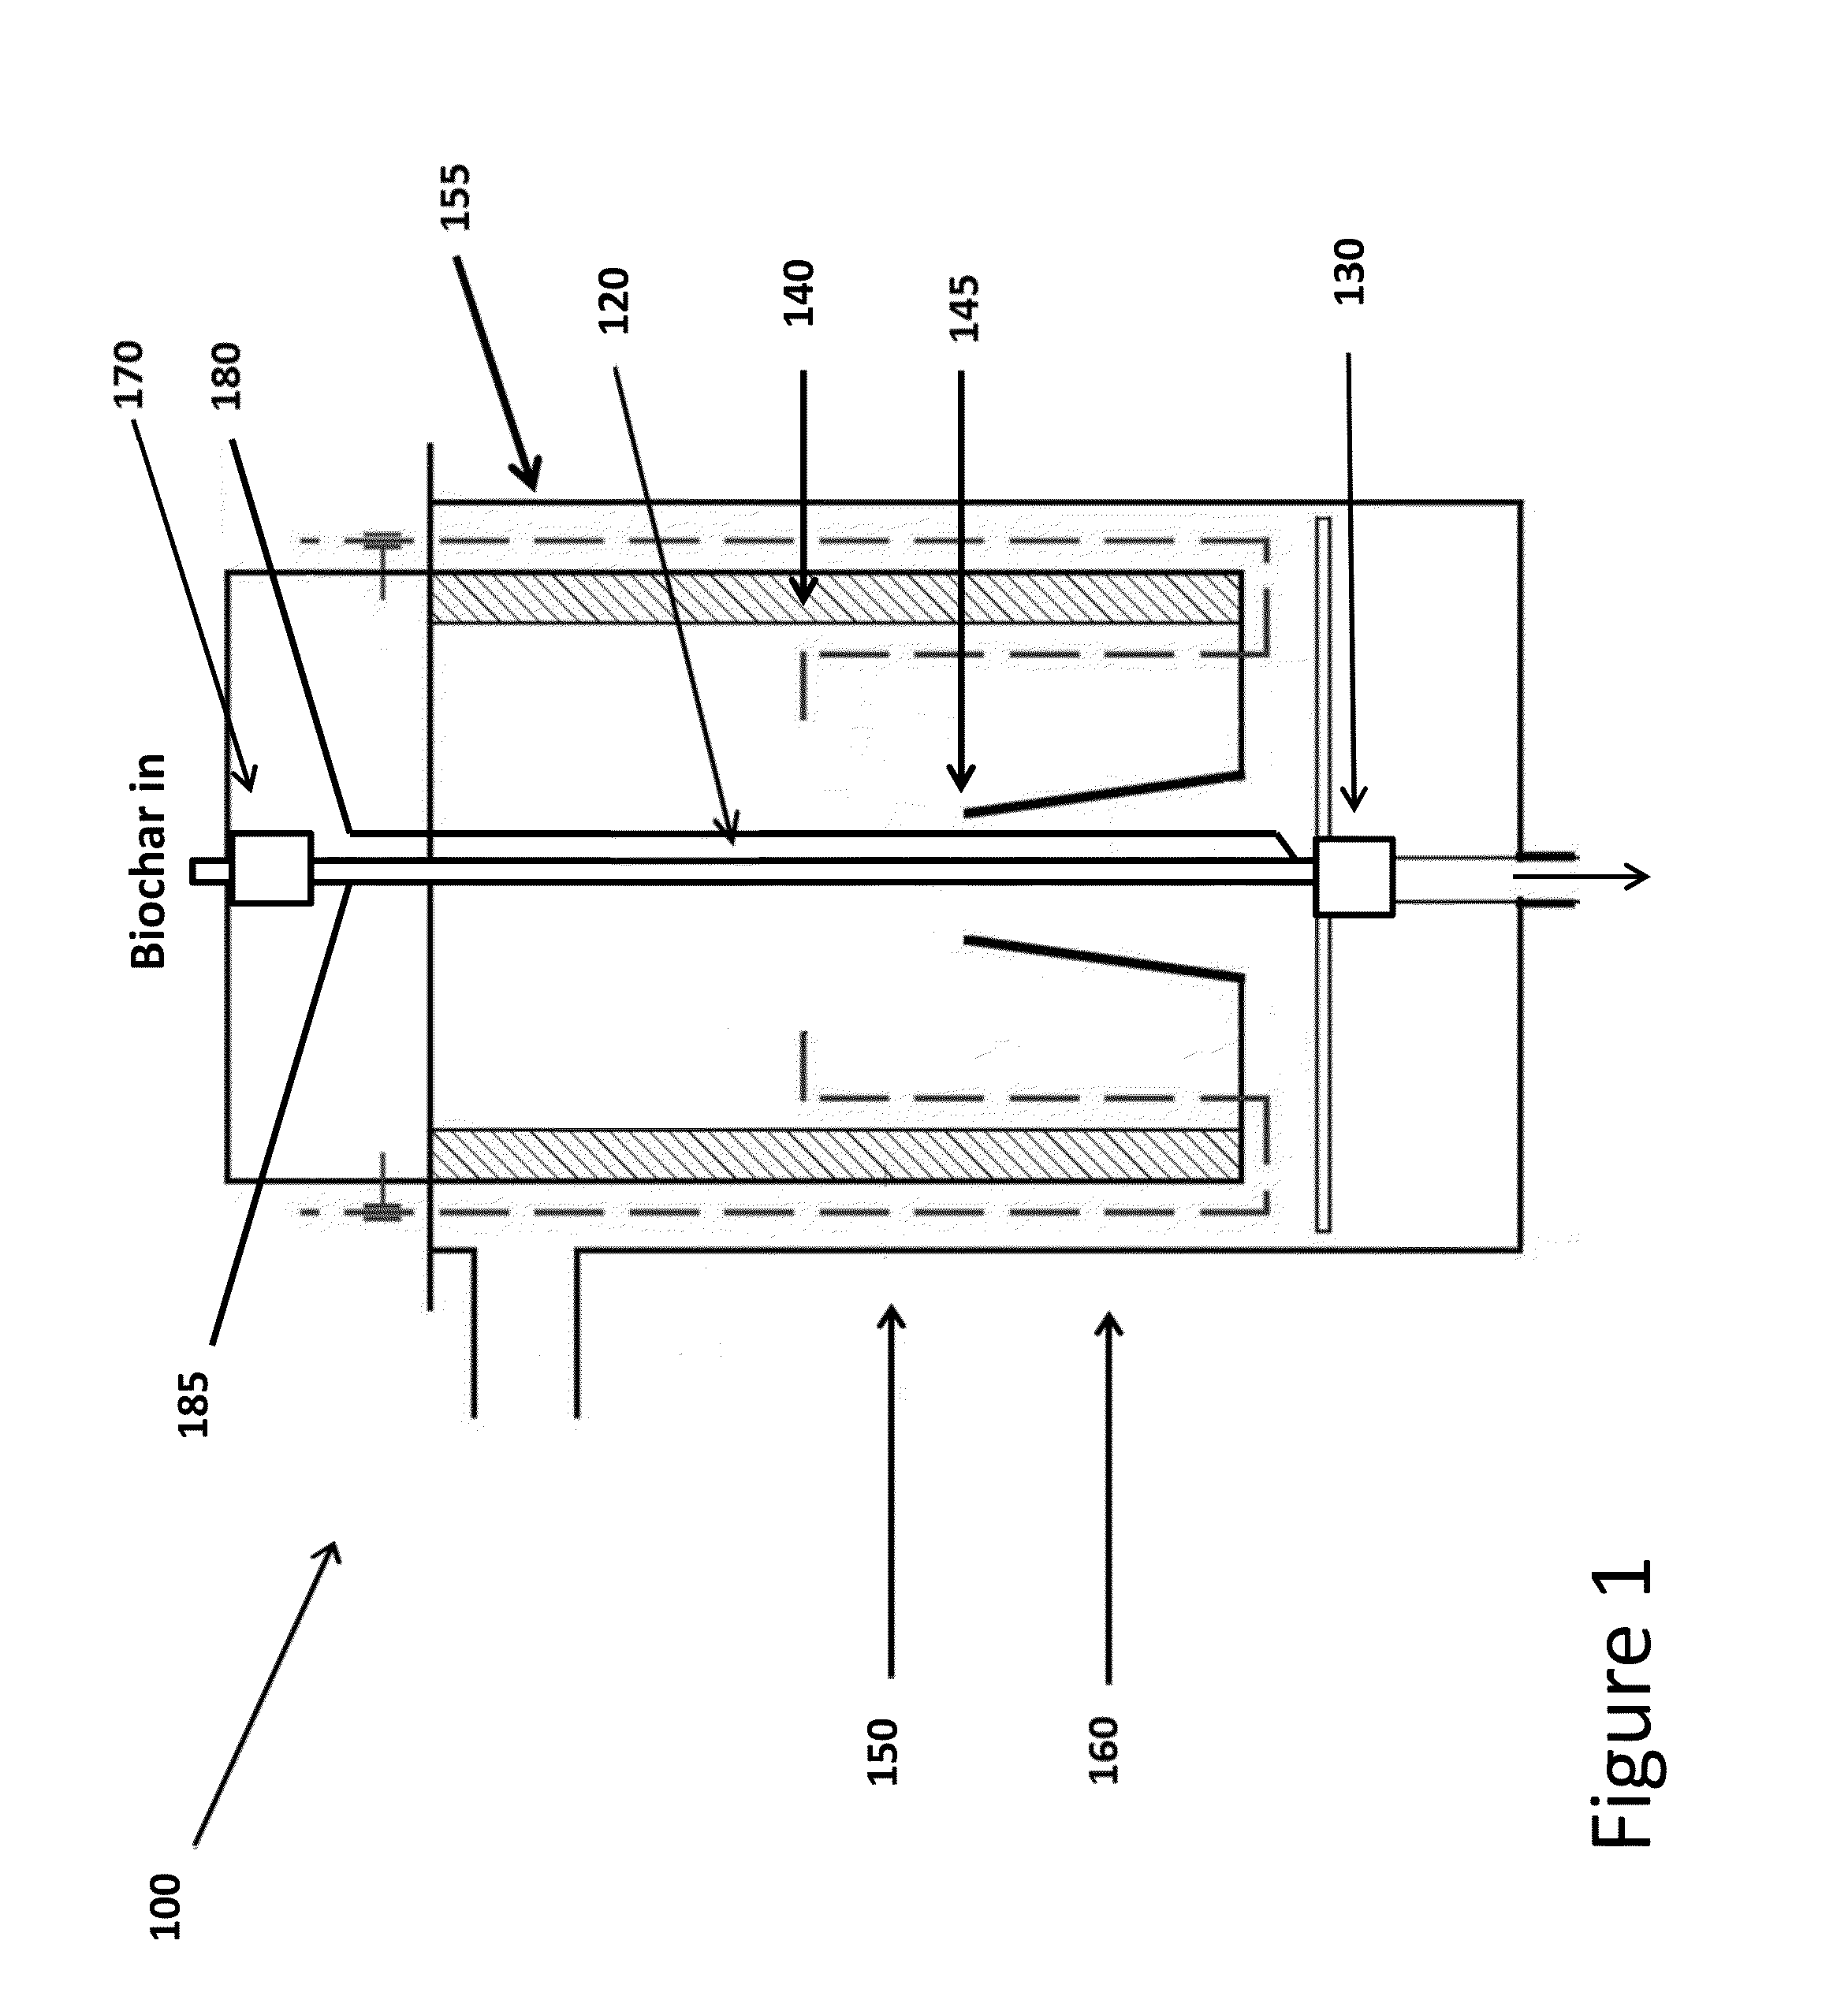 Coaxial gasifier for enhanced hydrogen production